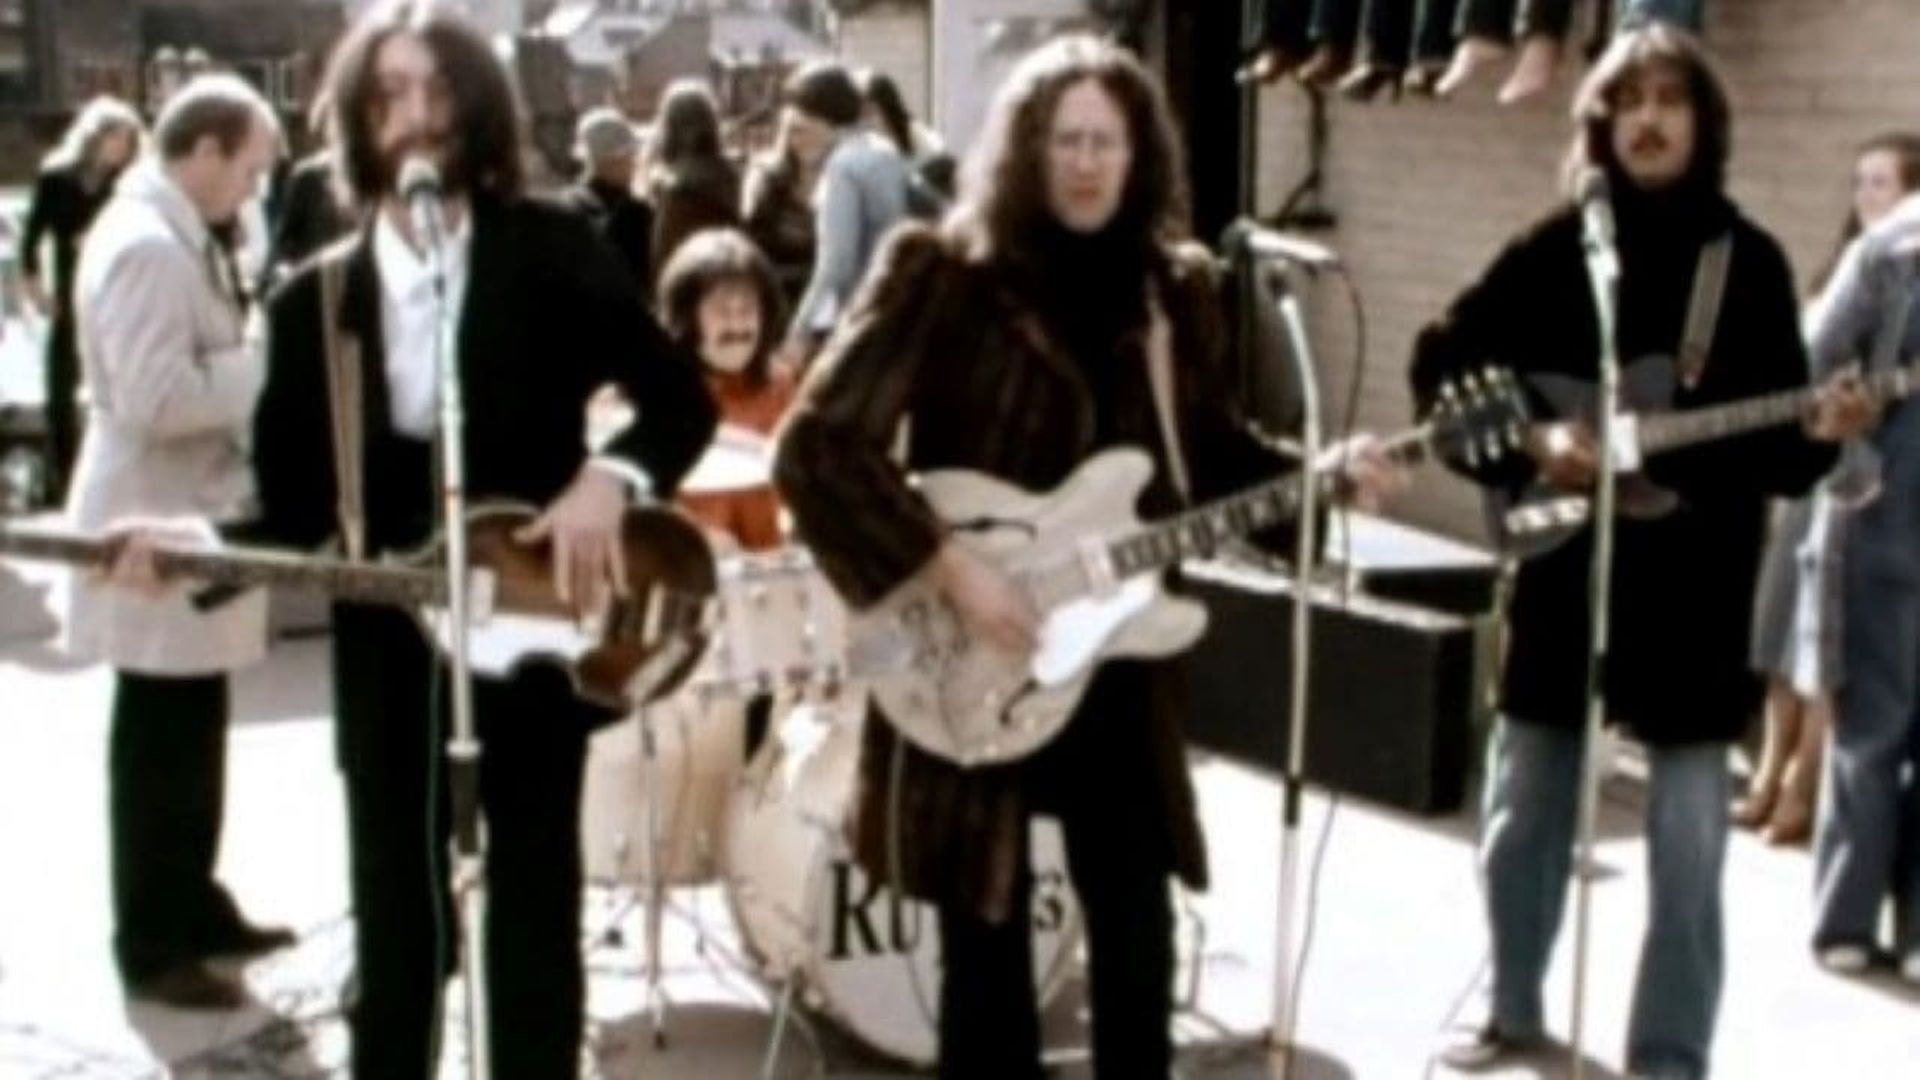 Get Up and Go: The Making of 'The Rutles' background